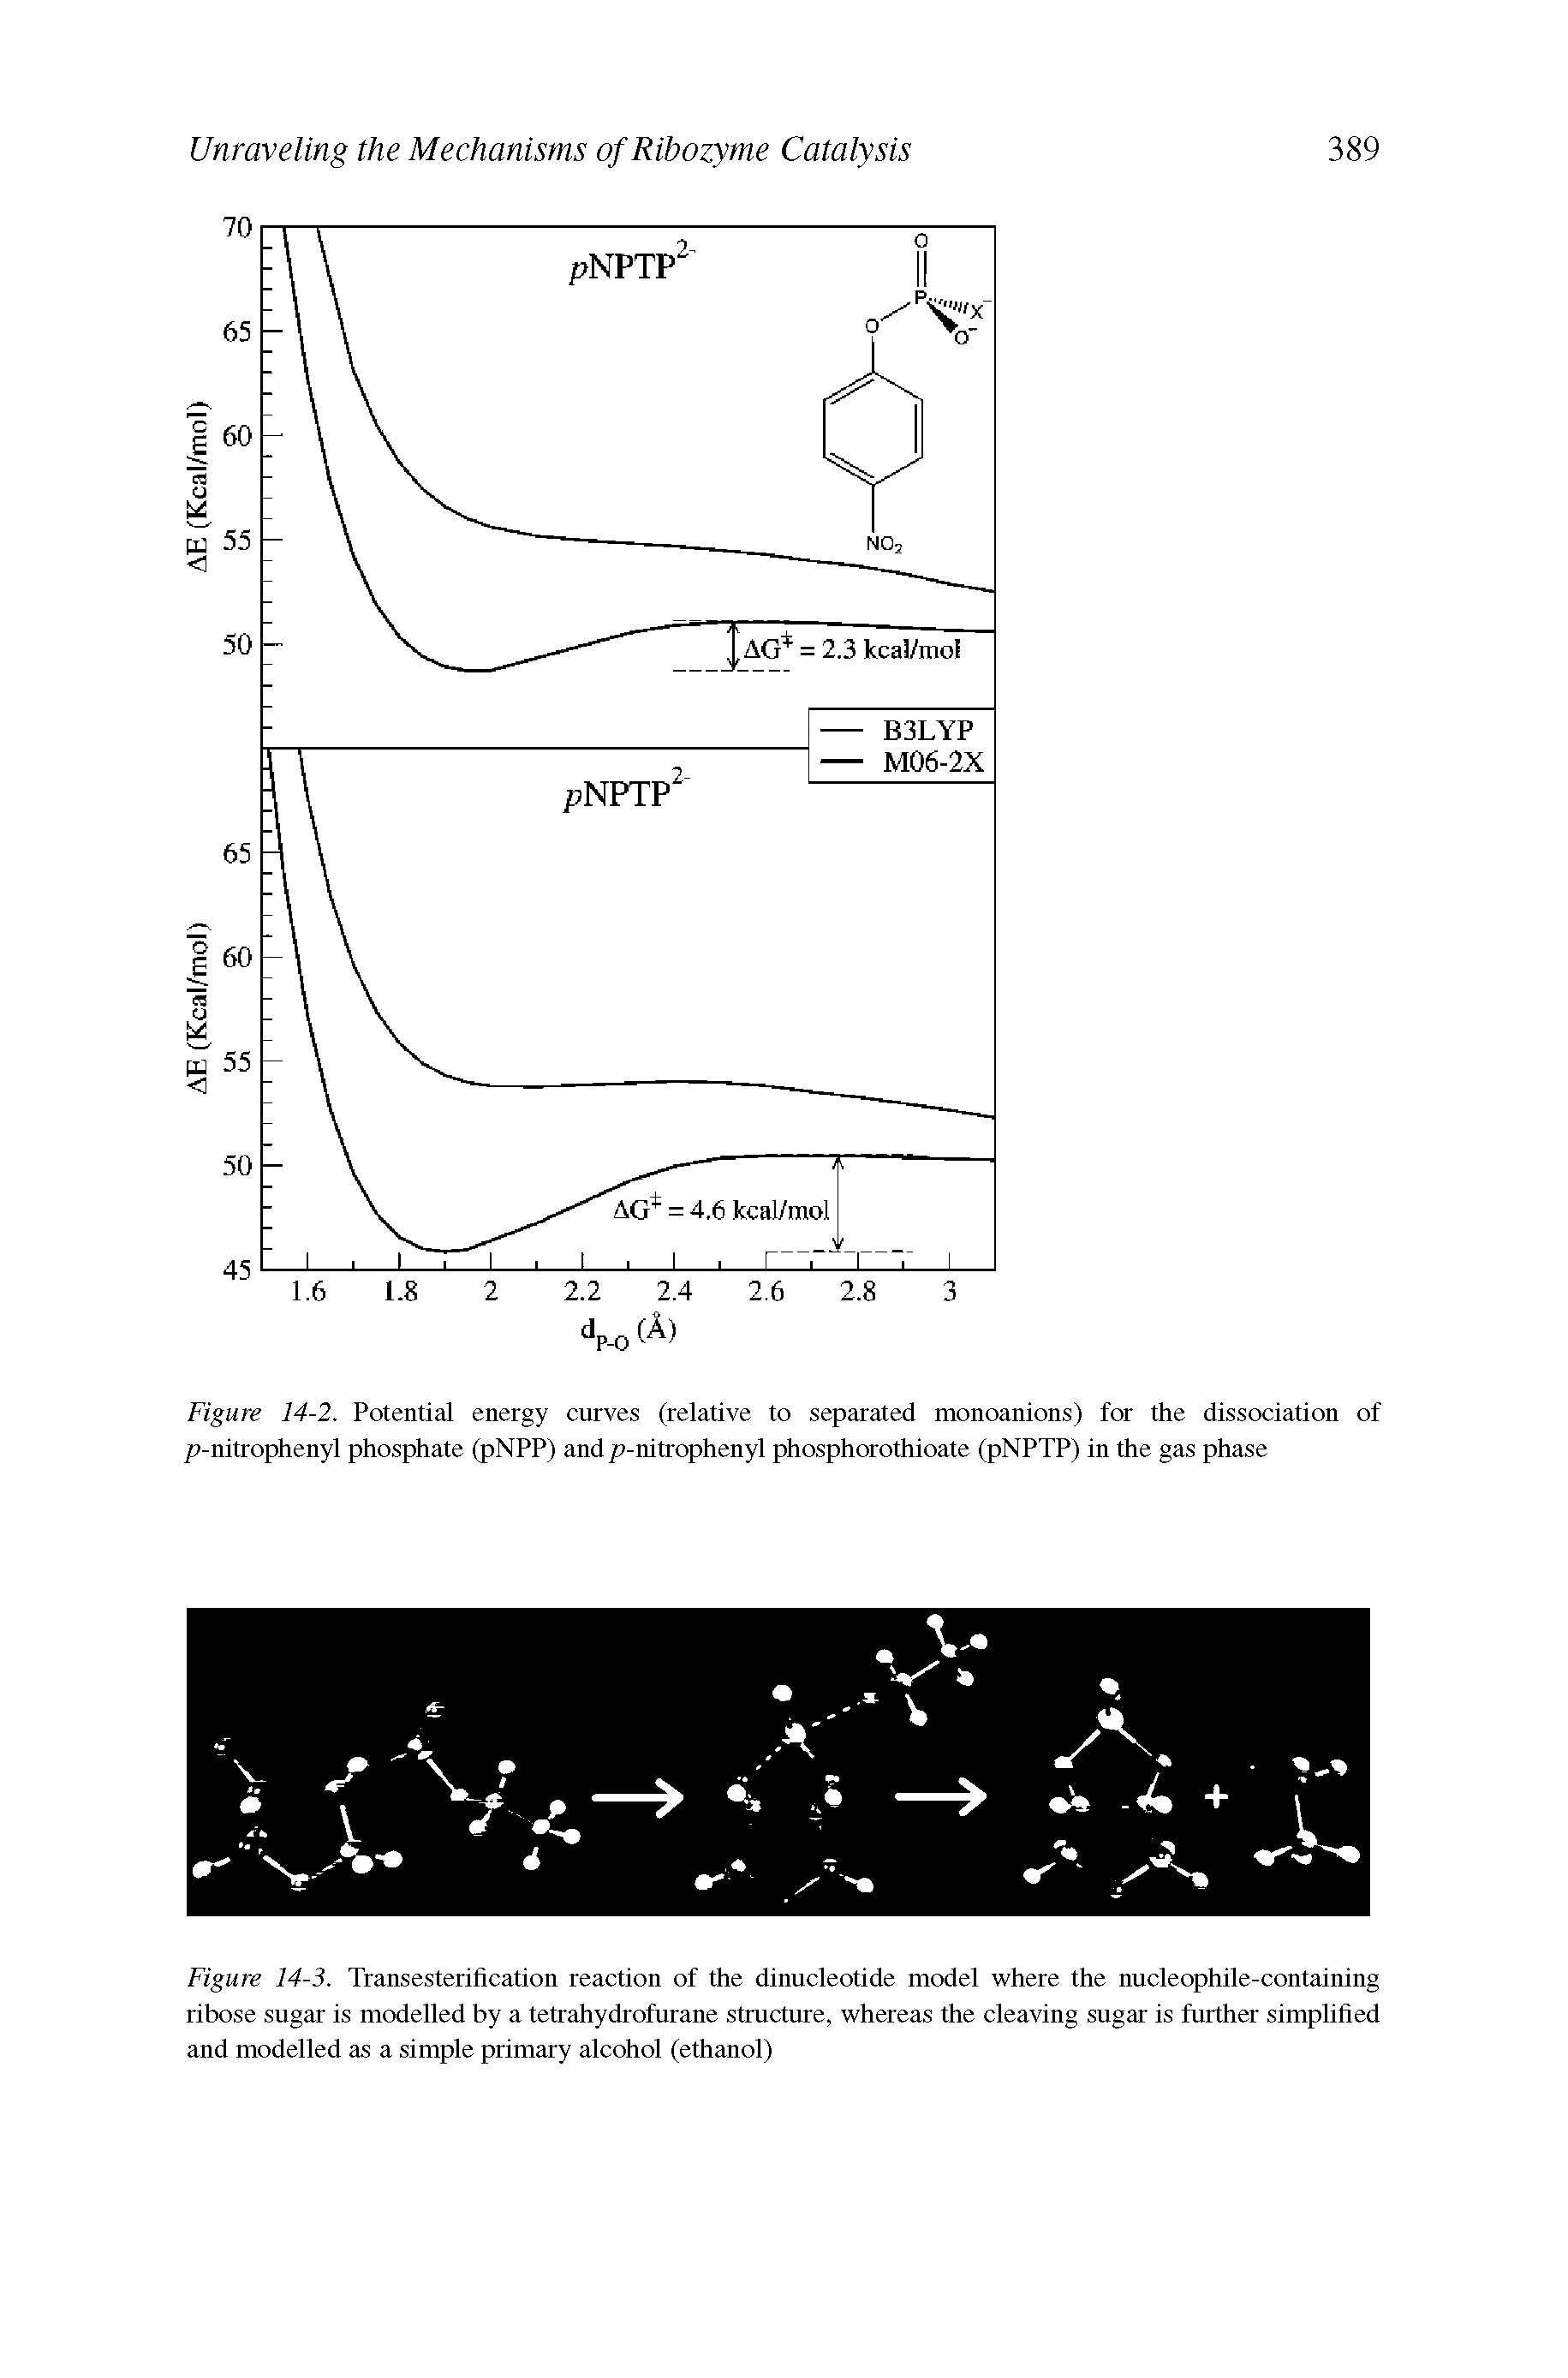 Figure 14-2. Potential energy curves (relative to separated monoanions) for the dissociation of / -nitrophenyl phosphate (pNPP) and / -nitrophenyl phosphorothioate (pNPTP) in the gas phase...